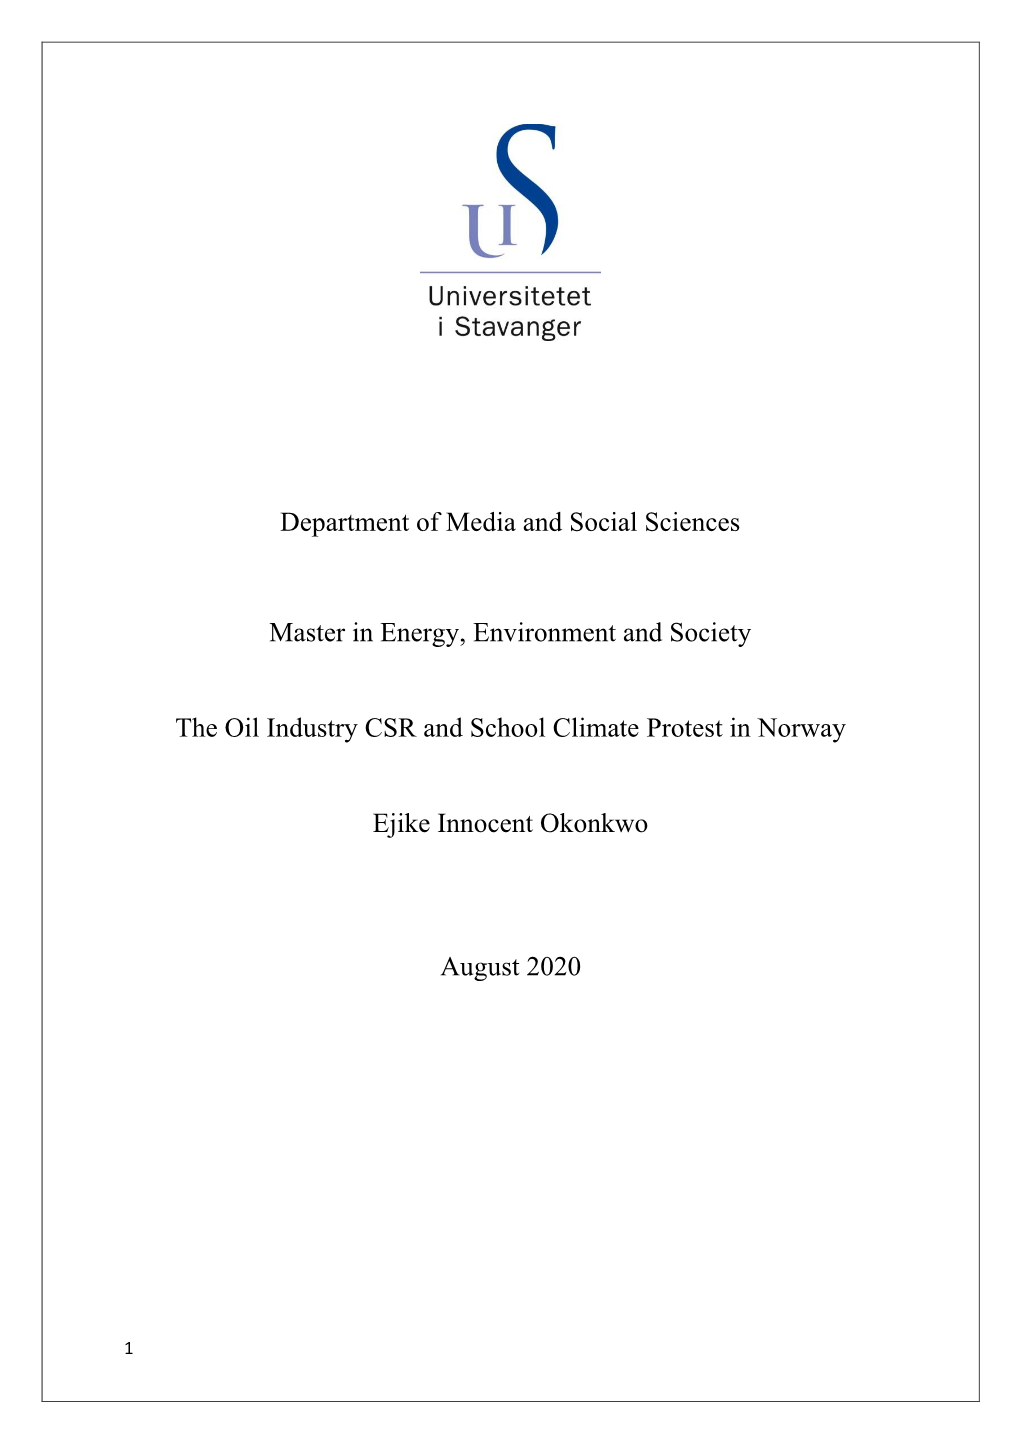 Master Thesis Title: the Oil Industry CSR and School Climate Protest in Norway